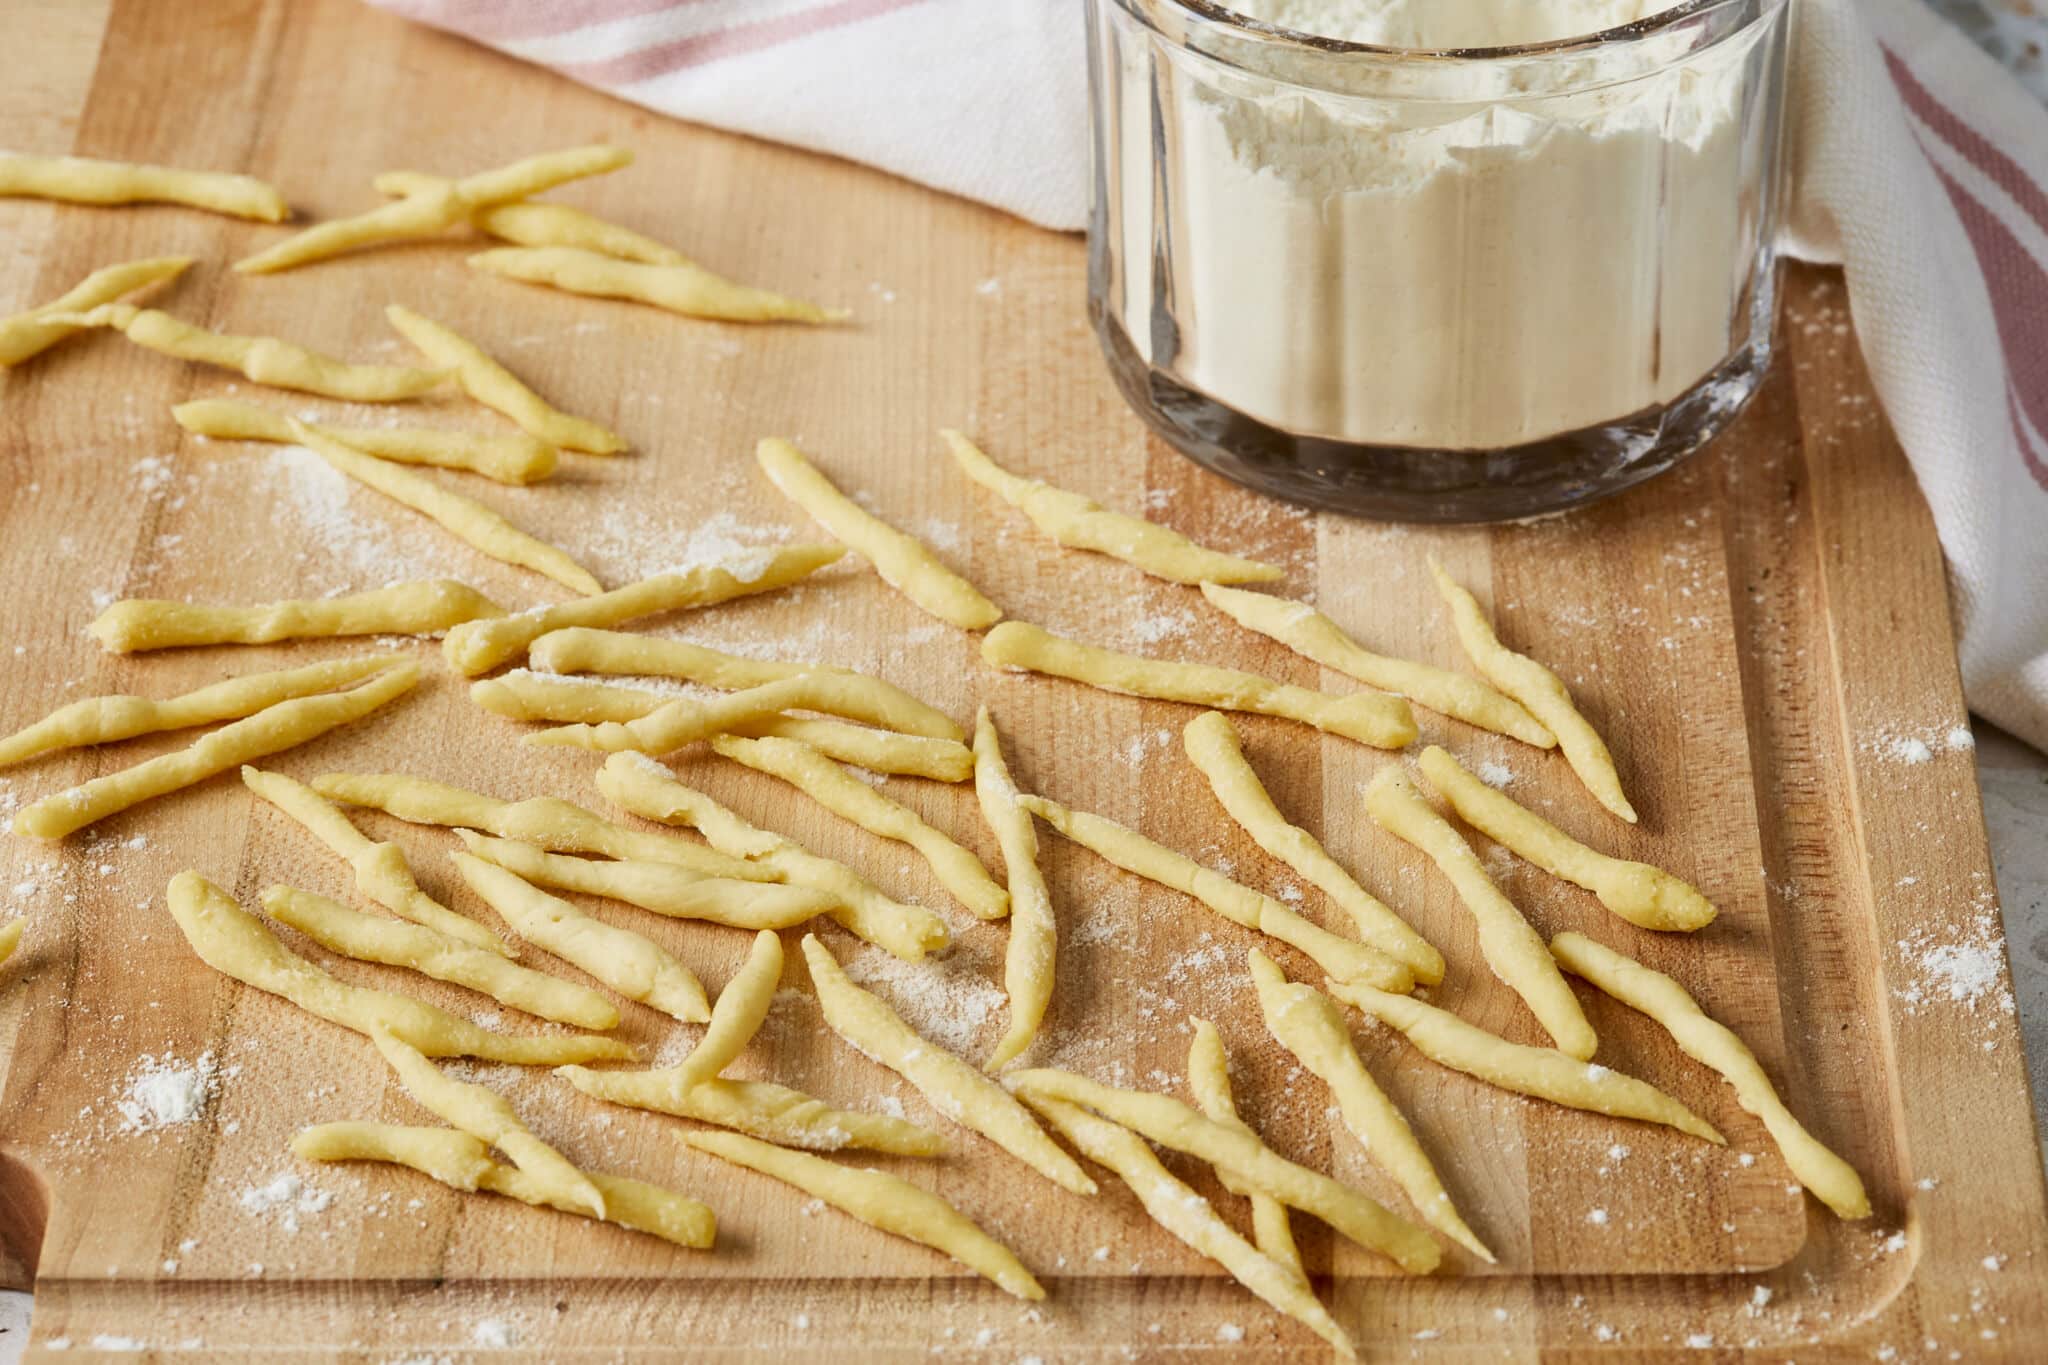 Semolina Trofie pasta is placed on a lightly floured wooden board. Their notable small, short, and irregular cylinder shape contributes to Trofie clinging to and absorbing sauces effectively.